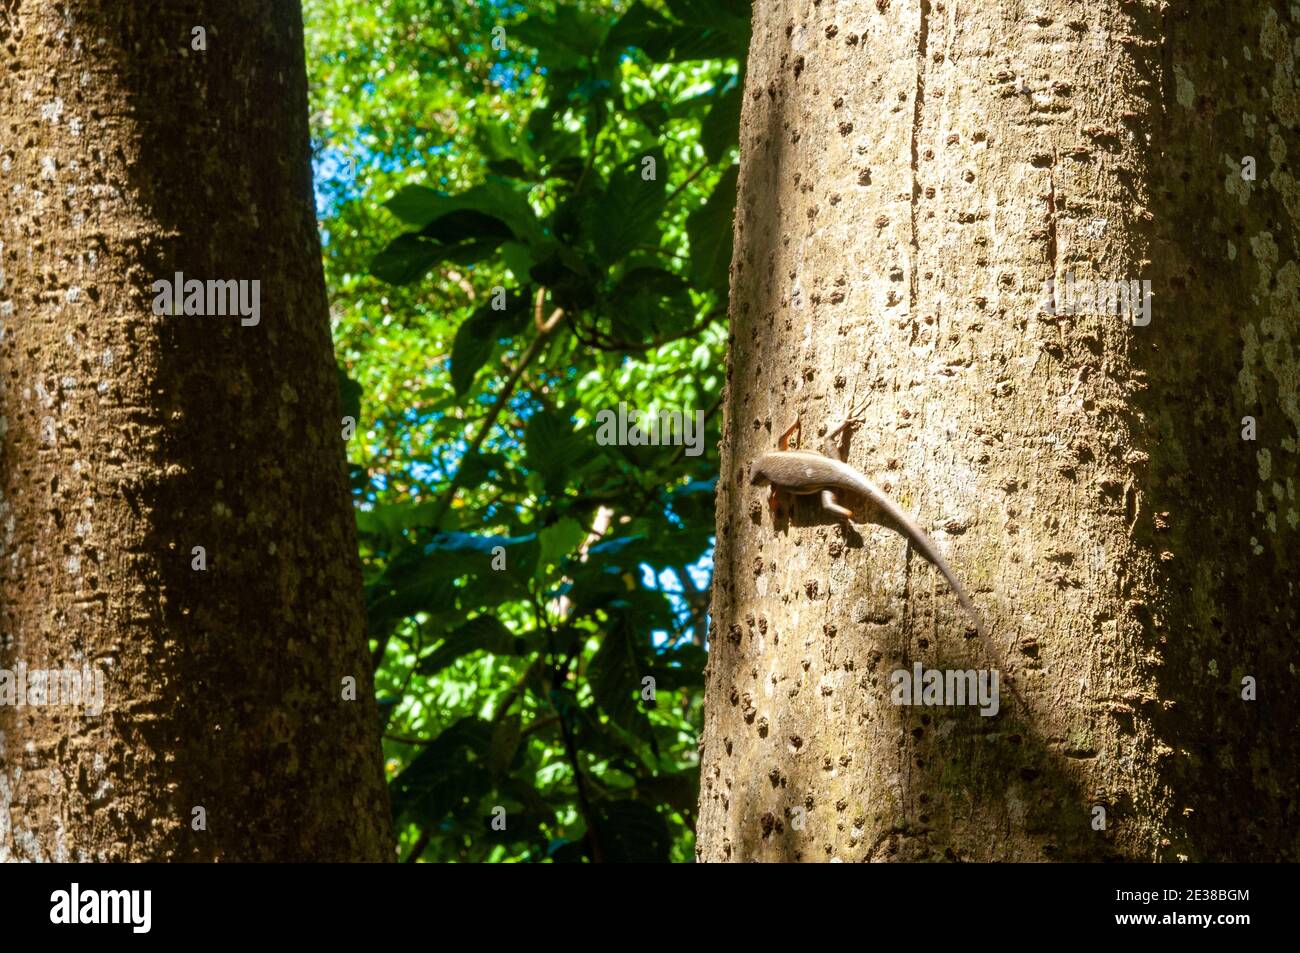 Tropical Skink lizard on the tree bark in the rainforest with sunlight Stock Photo